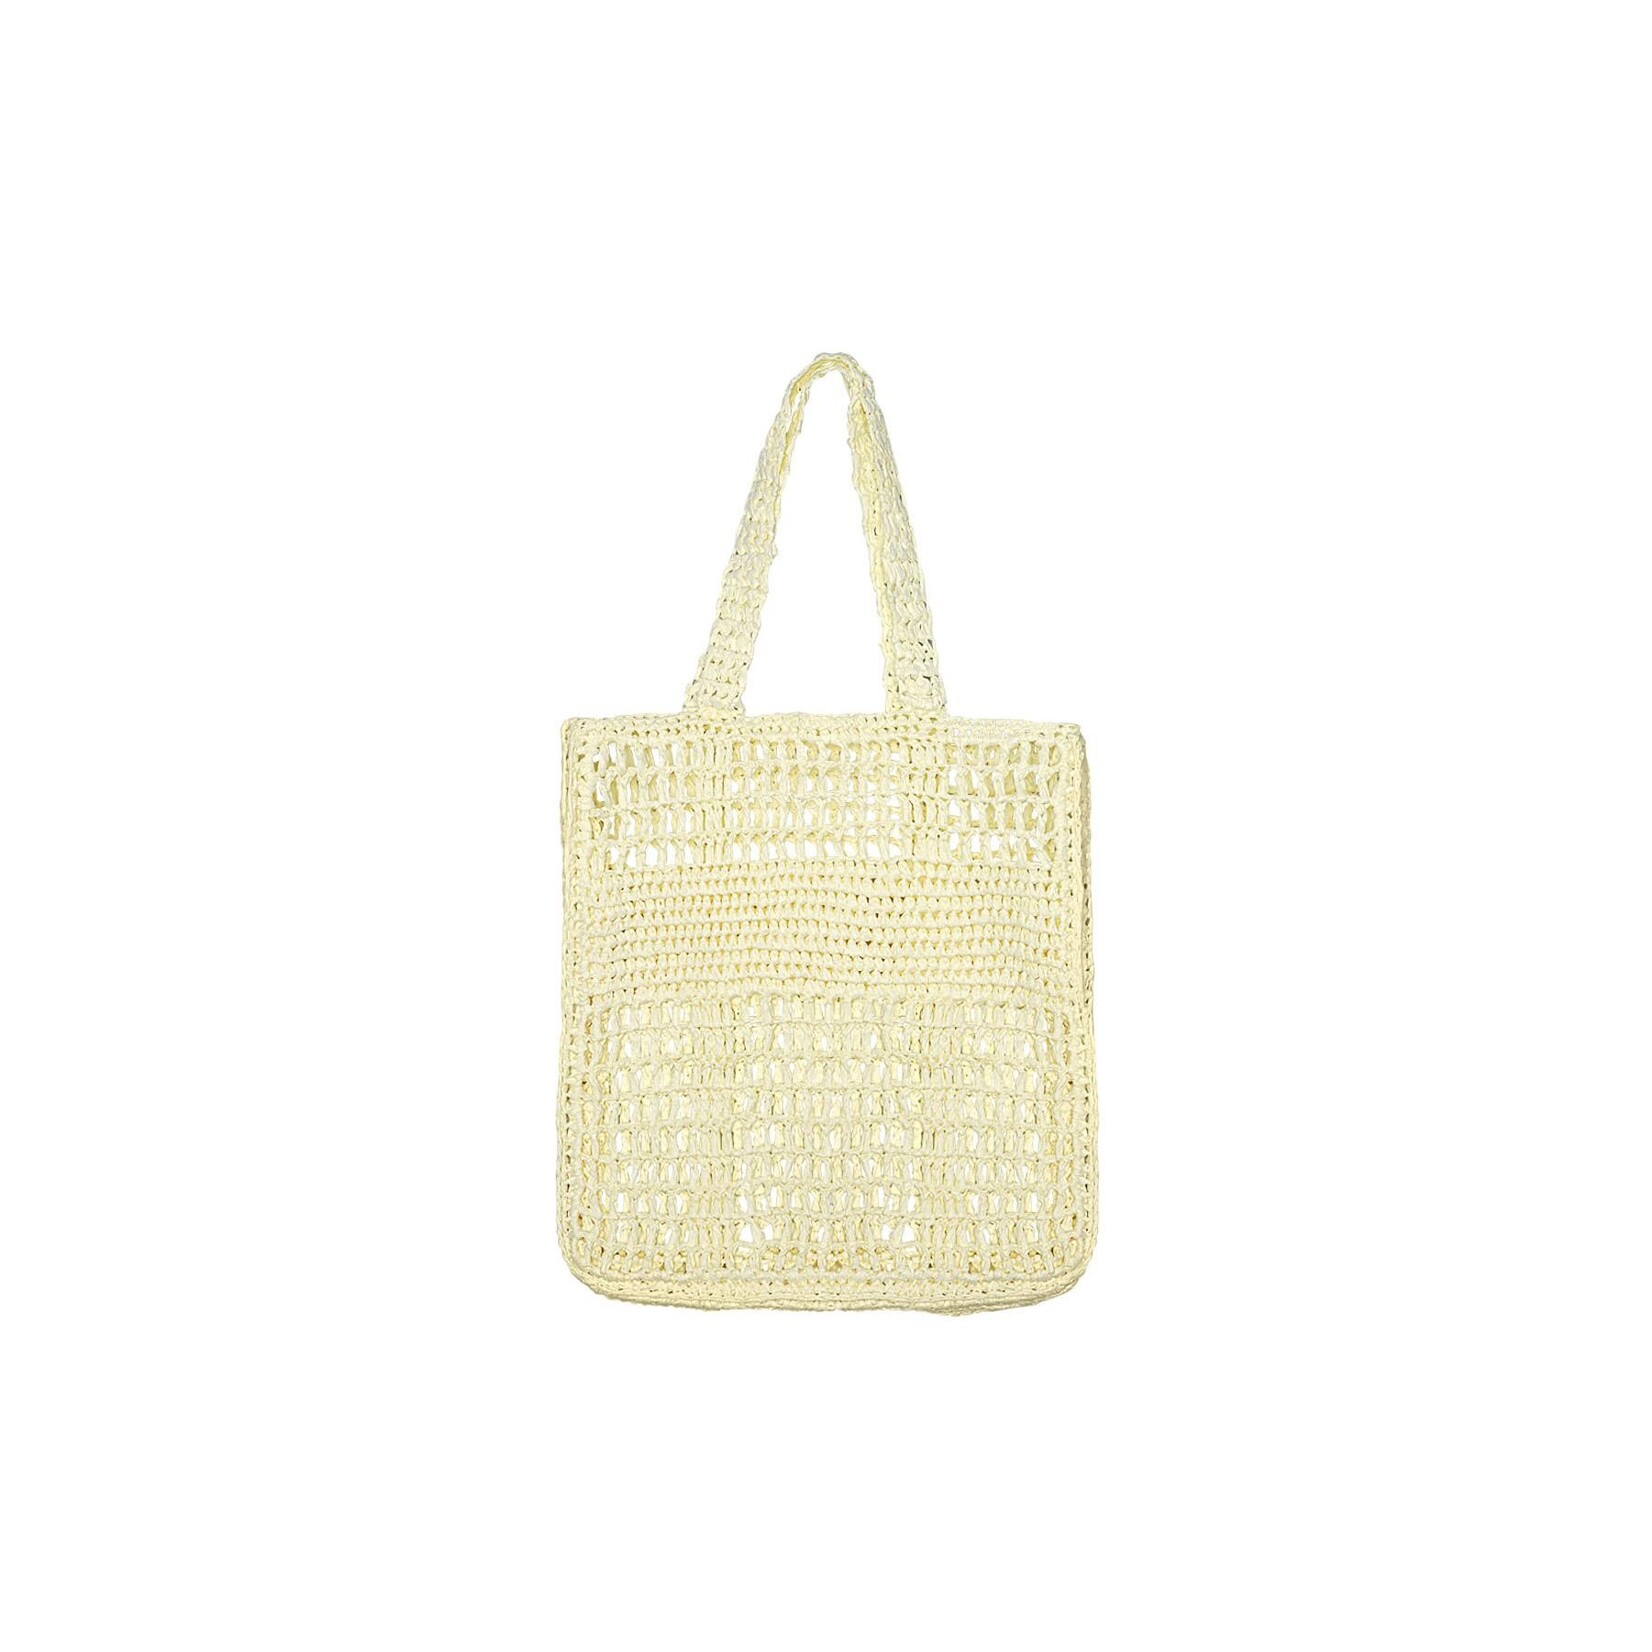 More the Firm Tote bag off-white